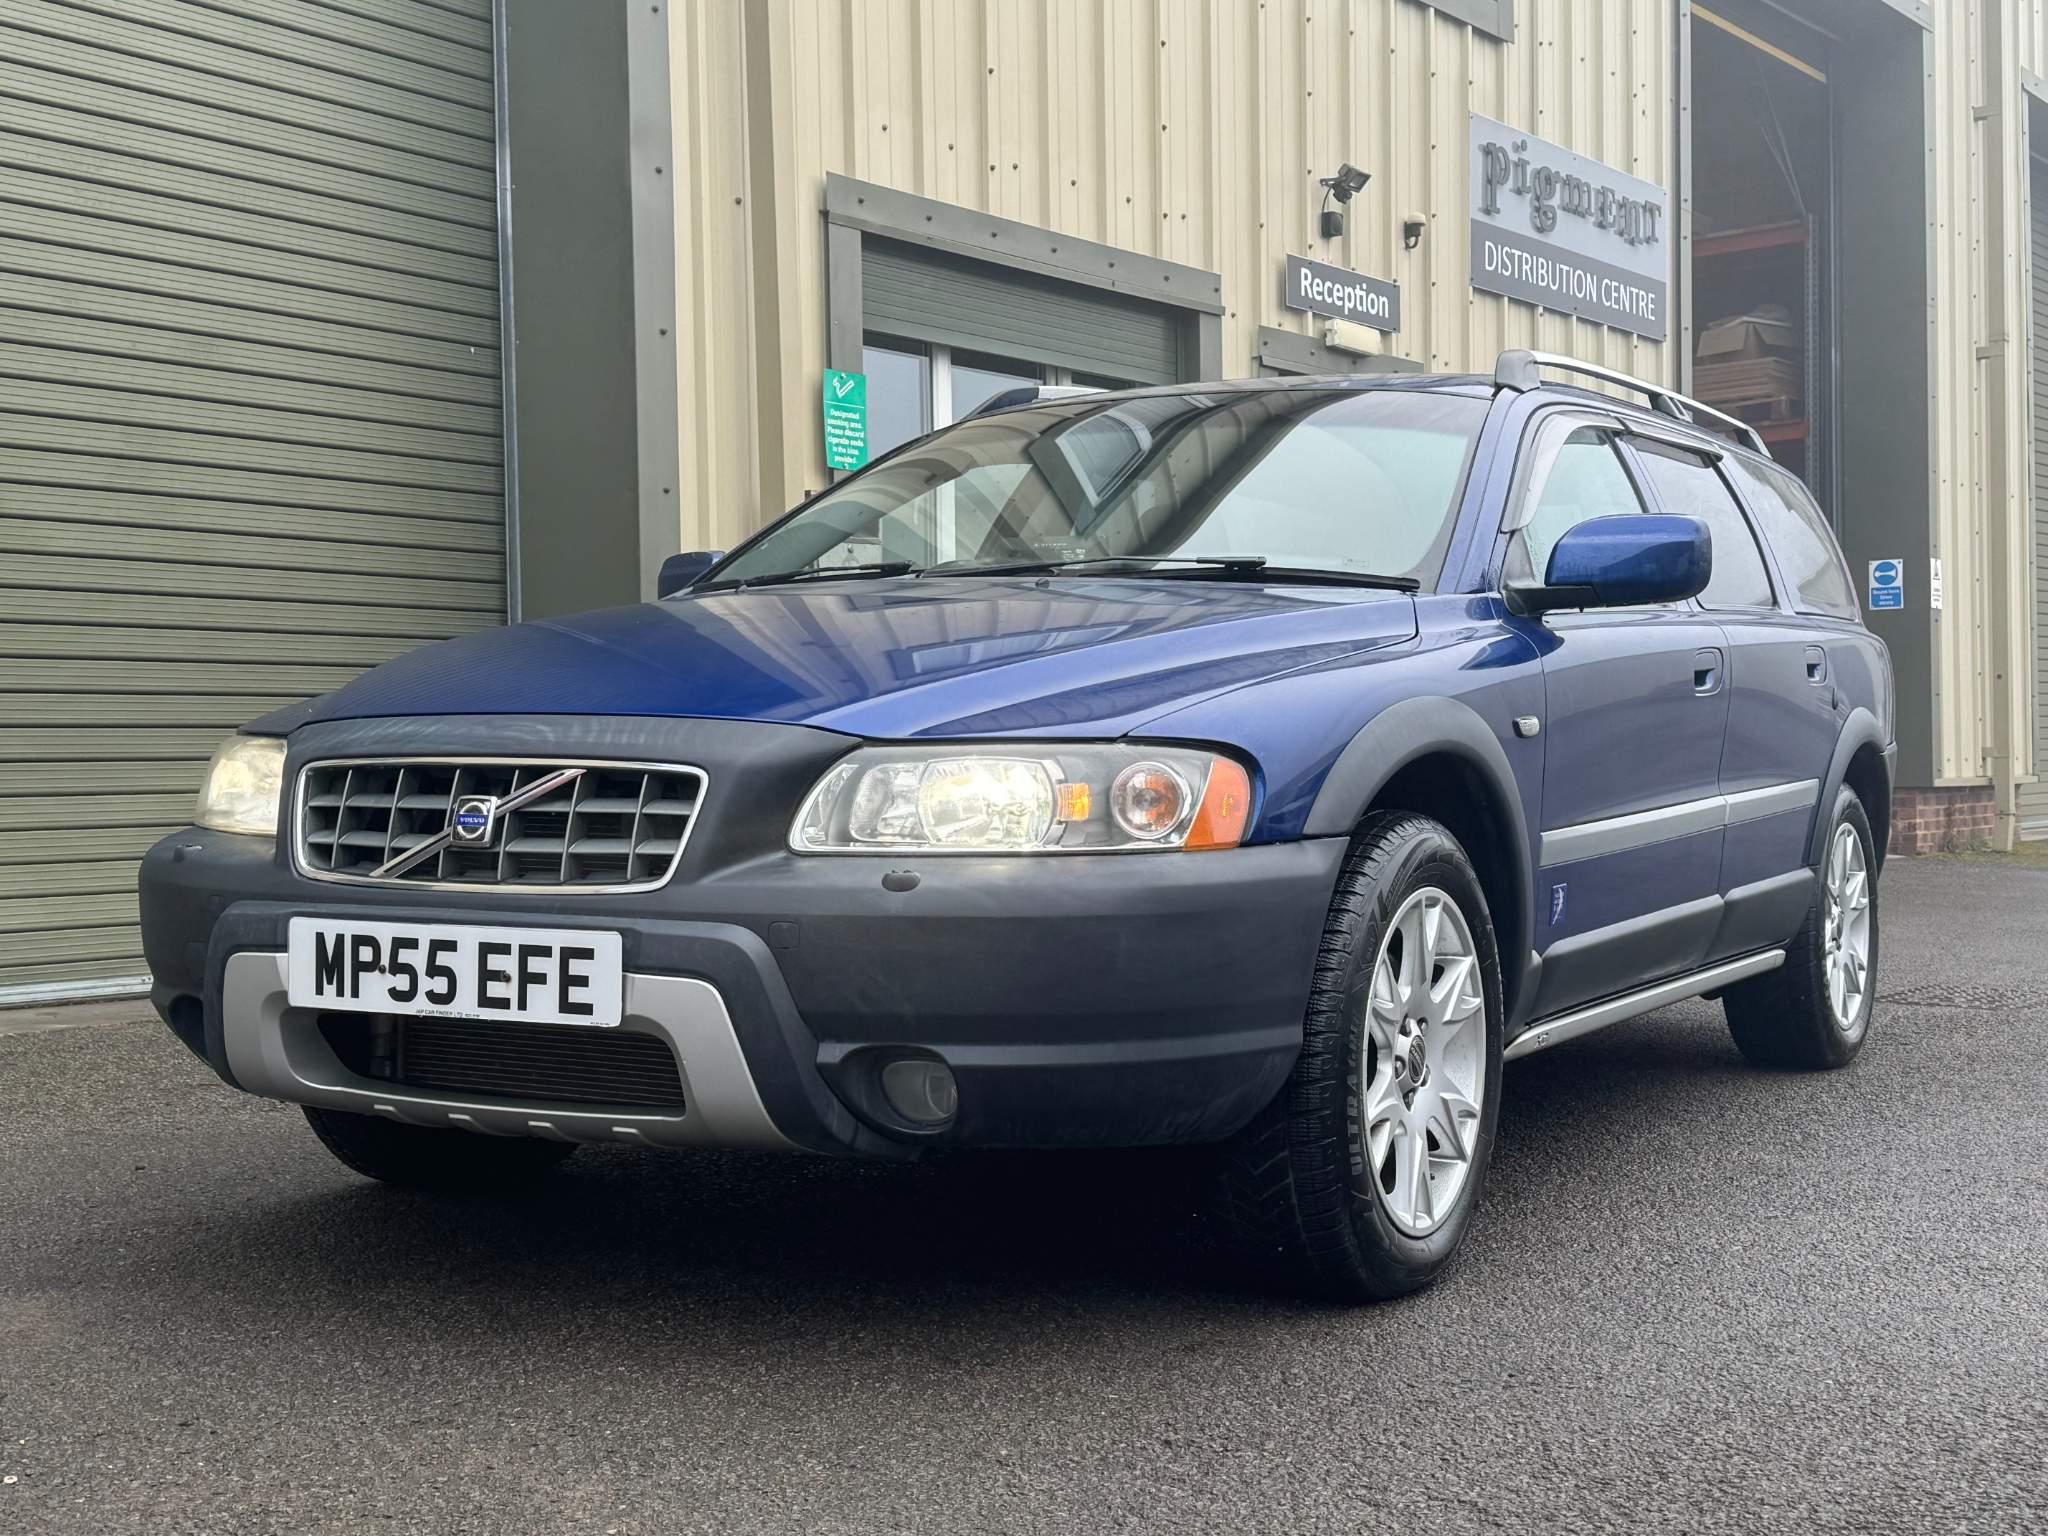 Used Volvo XC70 Cars For Sale | AutoTrader UK